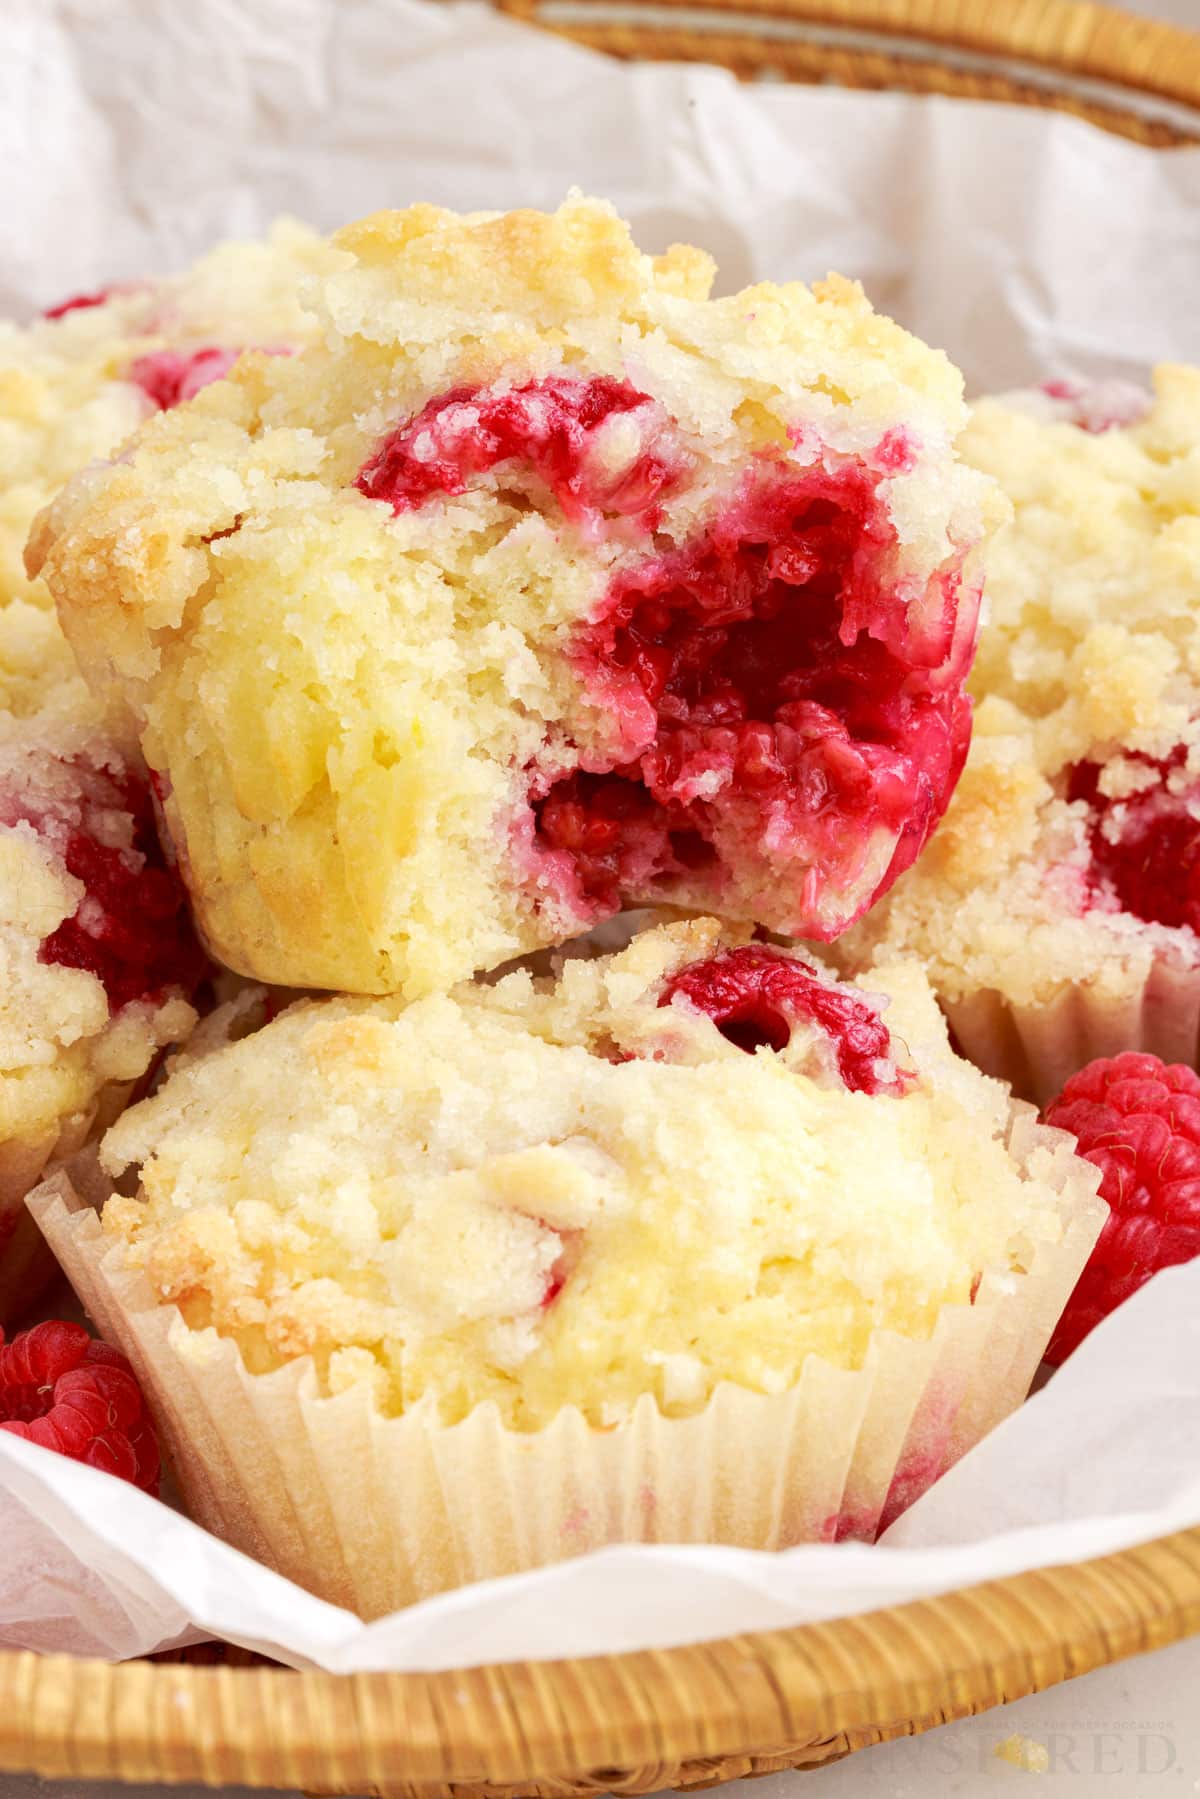 Lemon Raspberry Muffins in a basket lined with paper and a bite taken from the top one.